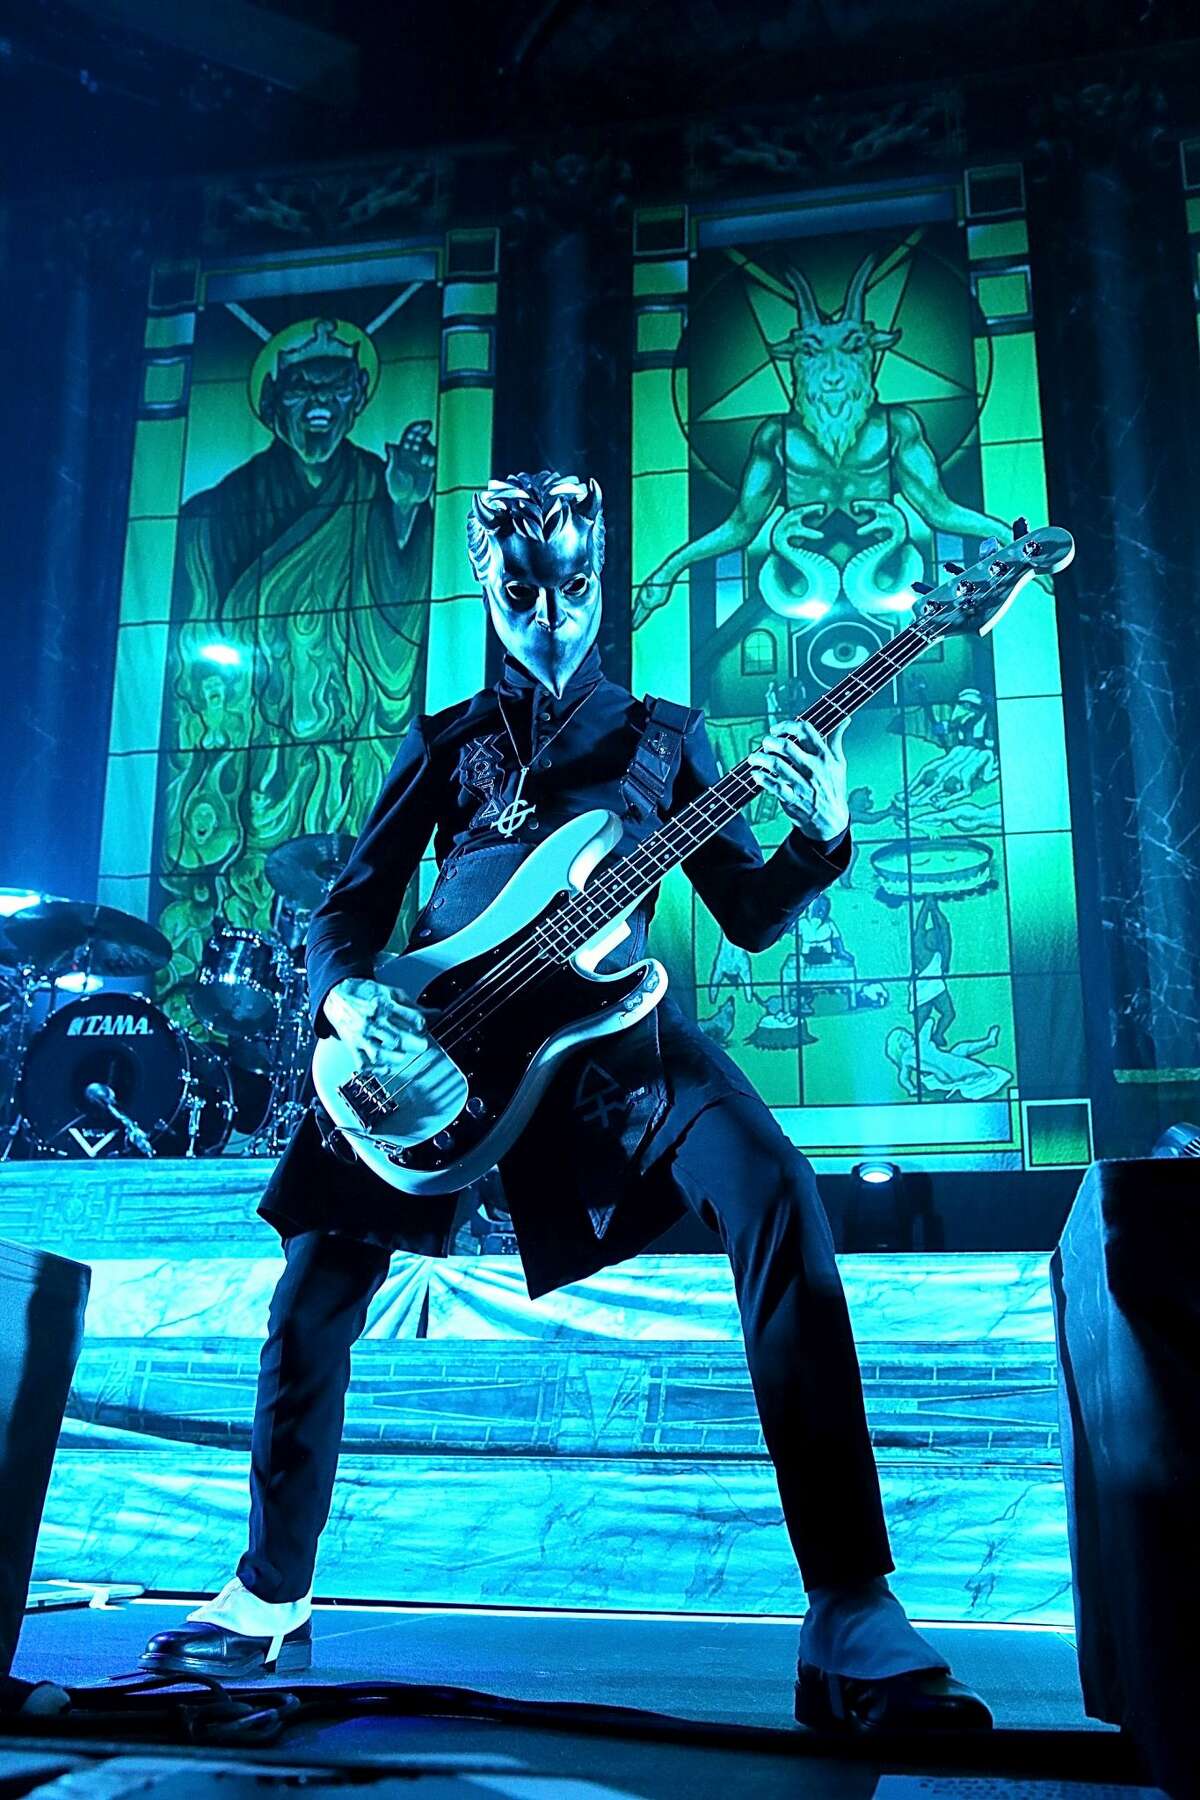 Ghost a Swedish heavy metal band performed at the AT&T Center Saturday